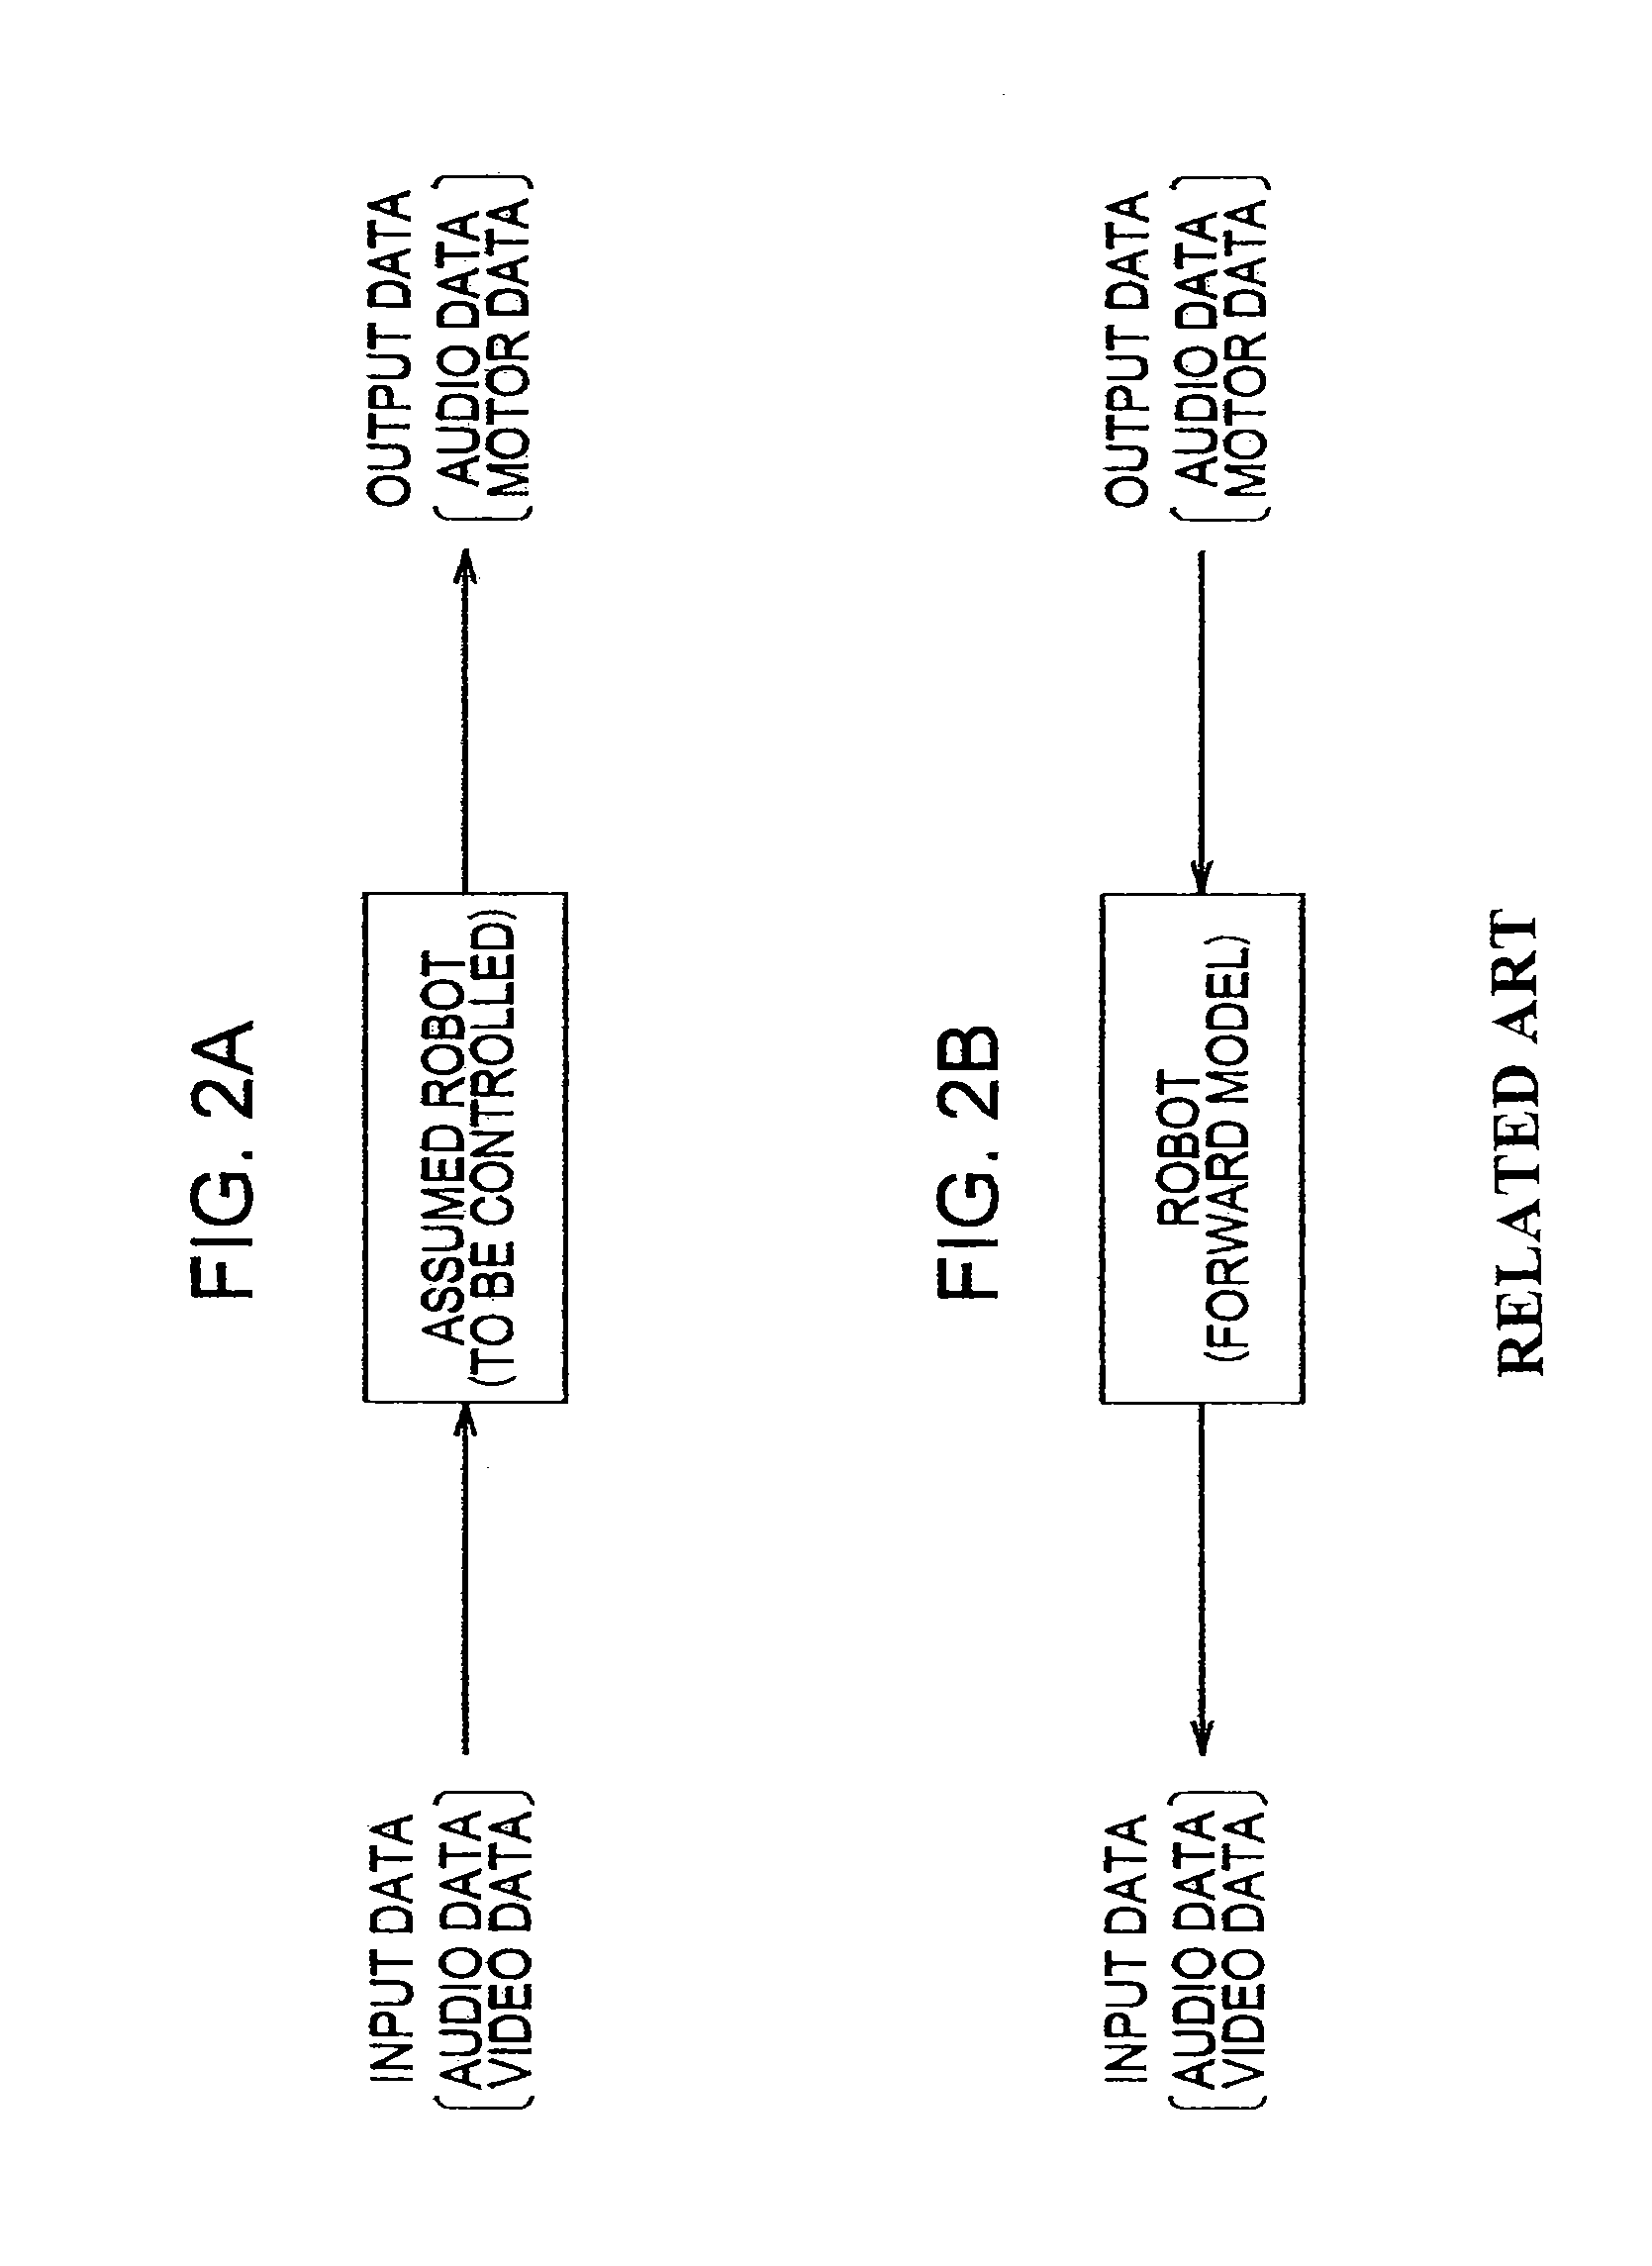 Method and apparatus for learning data, method and apparatus for generating data, and computer program